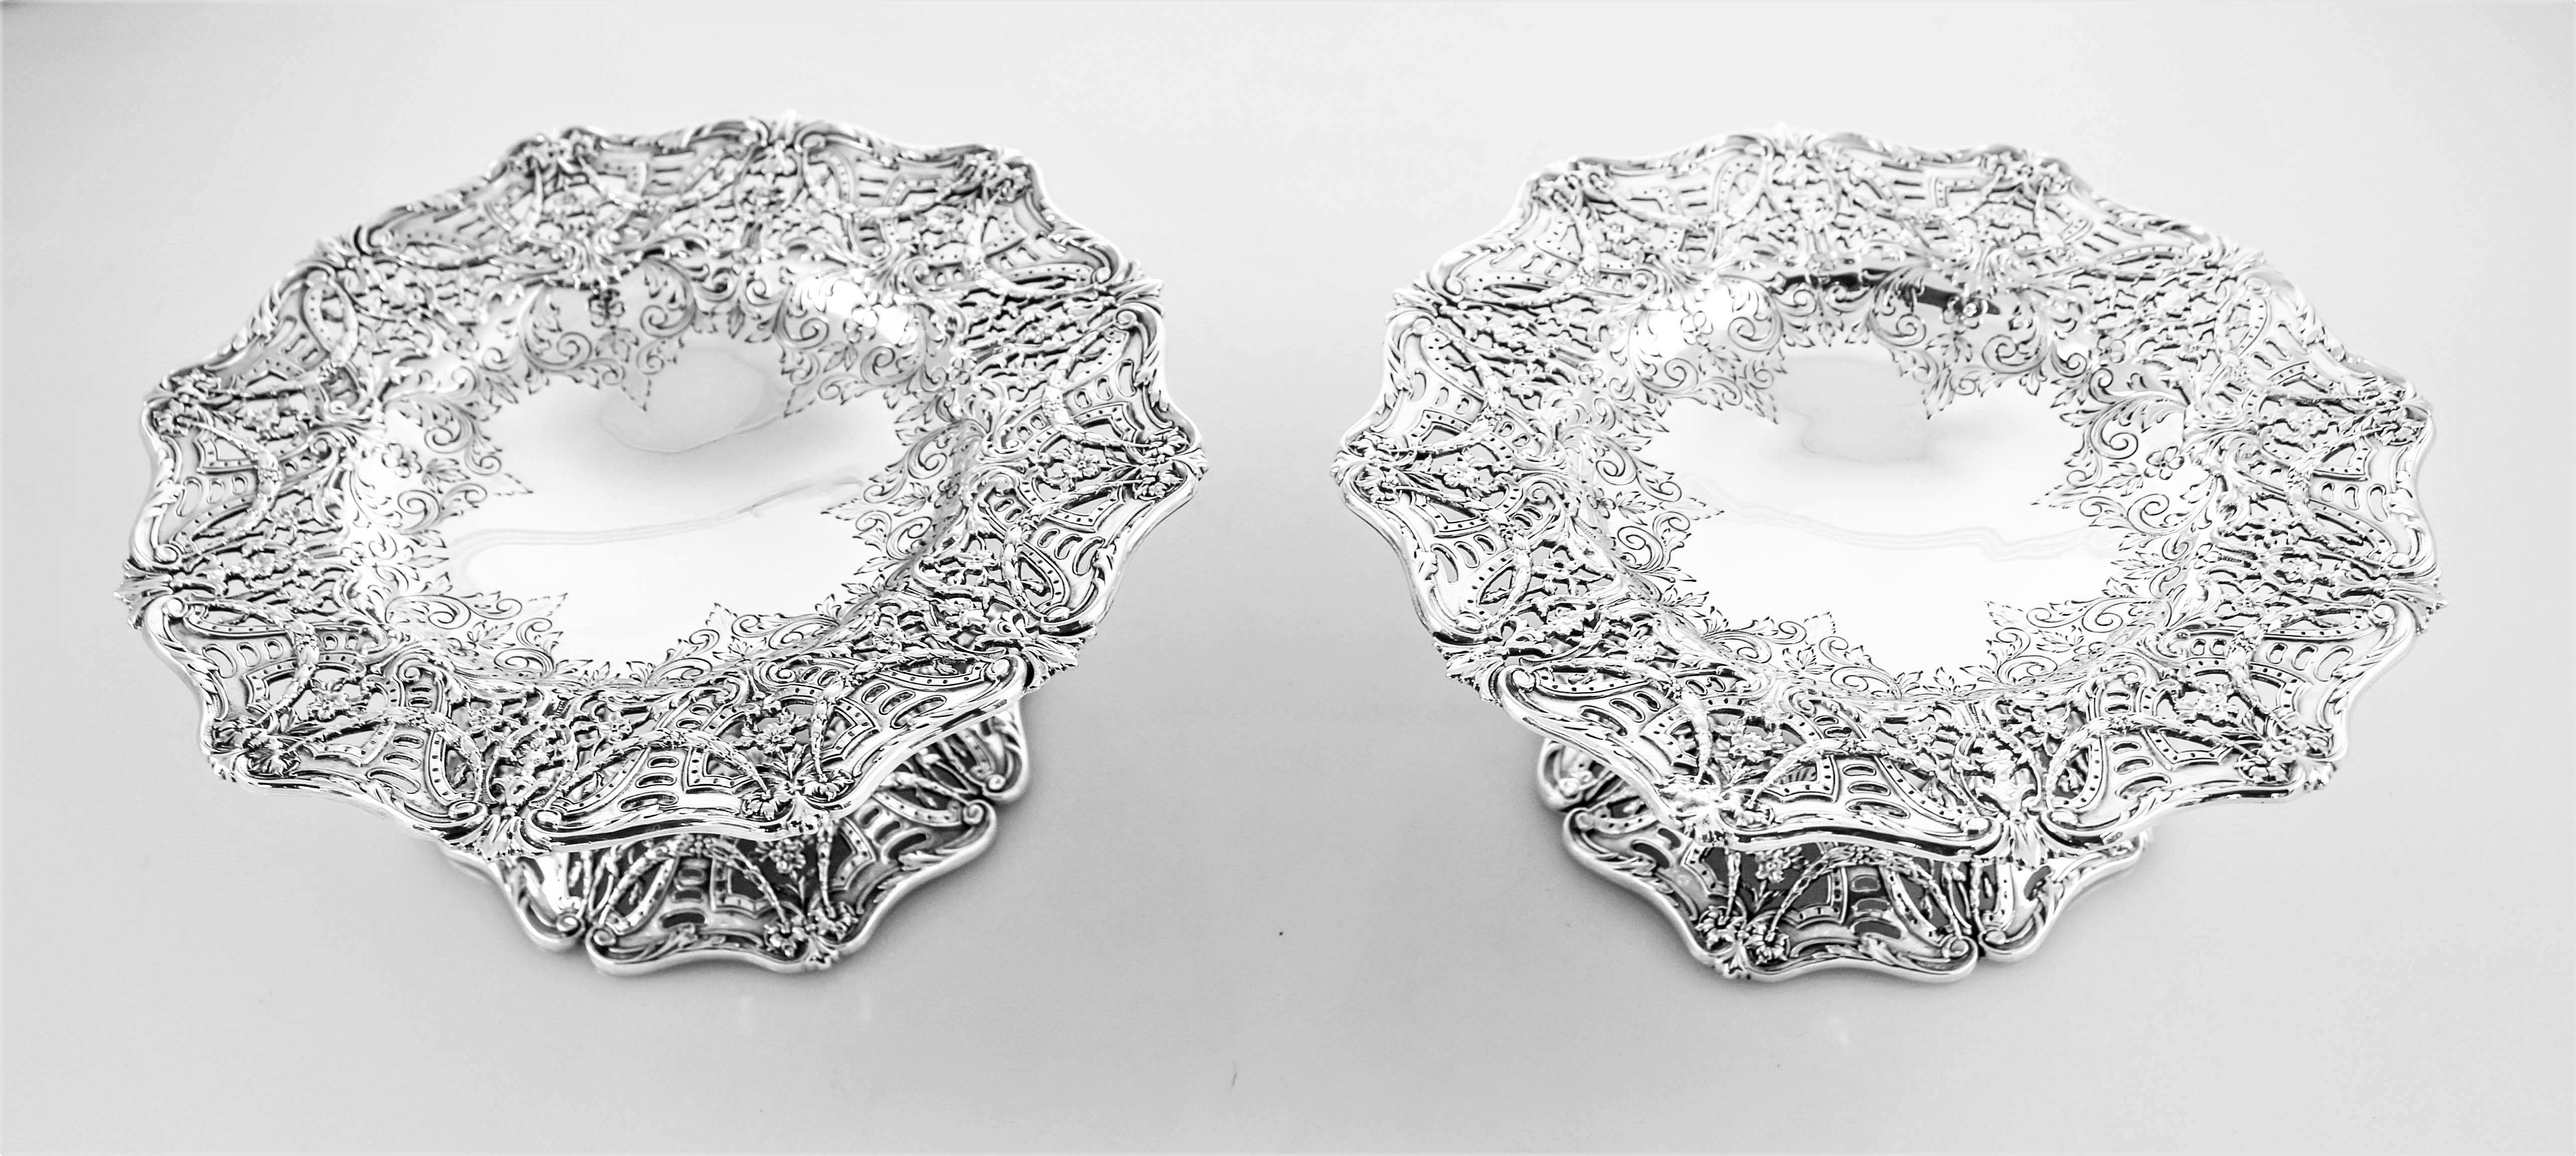 American craftsmanship at its finest! This pair of compotes made by Black Starr & Frost have scalloped edges both on top and along the base-- giving them a 